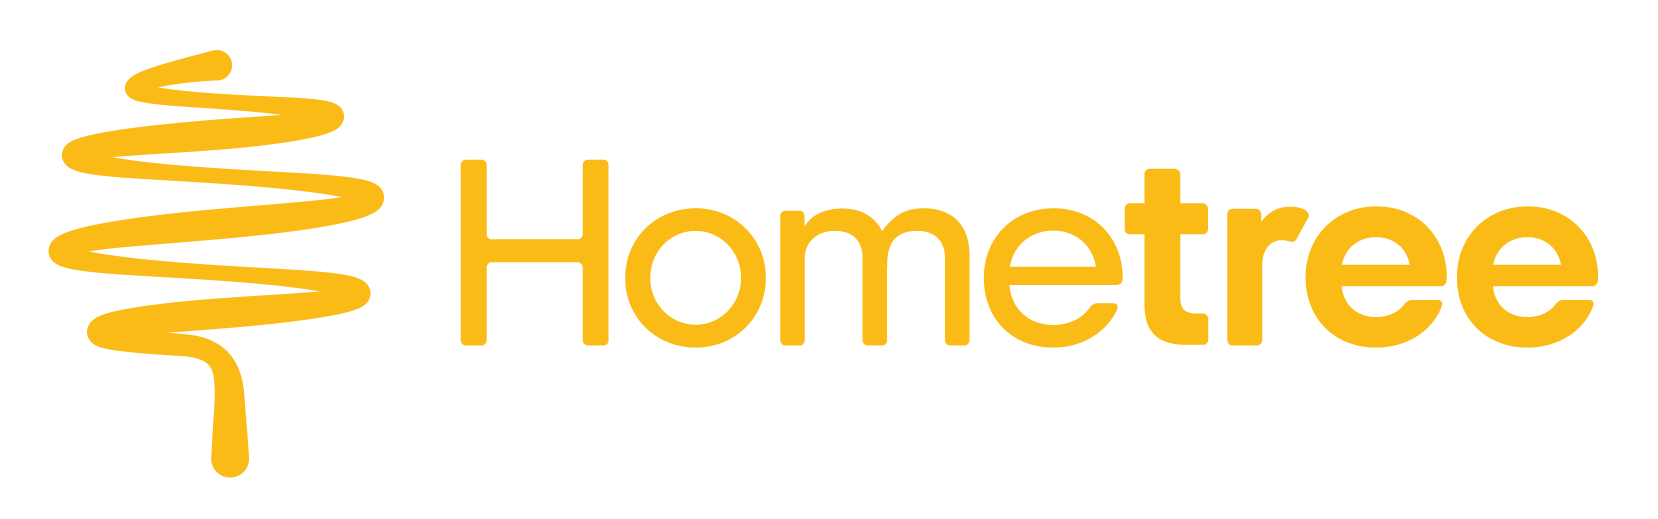 Home Tree Logo - New Boiler Installation & Replacement